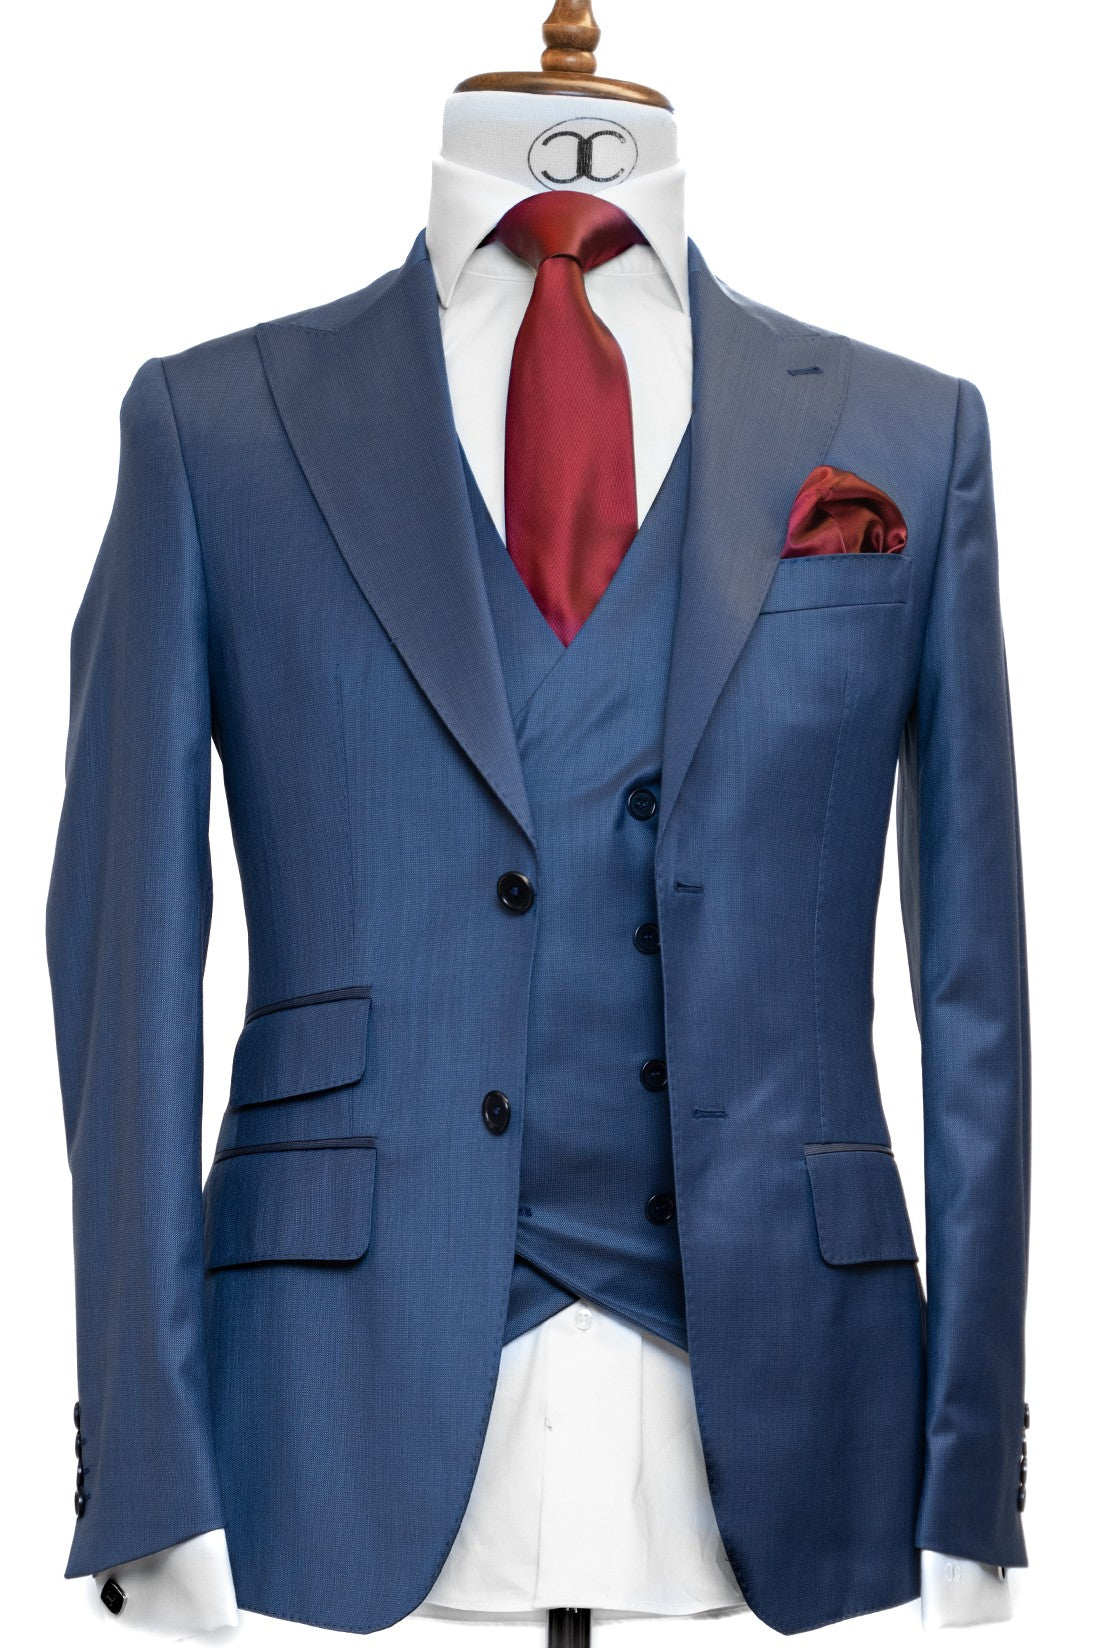 Lanificio Mario Filafil - Dull blue 3-piece slim fit suit with double breasted V vest